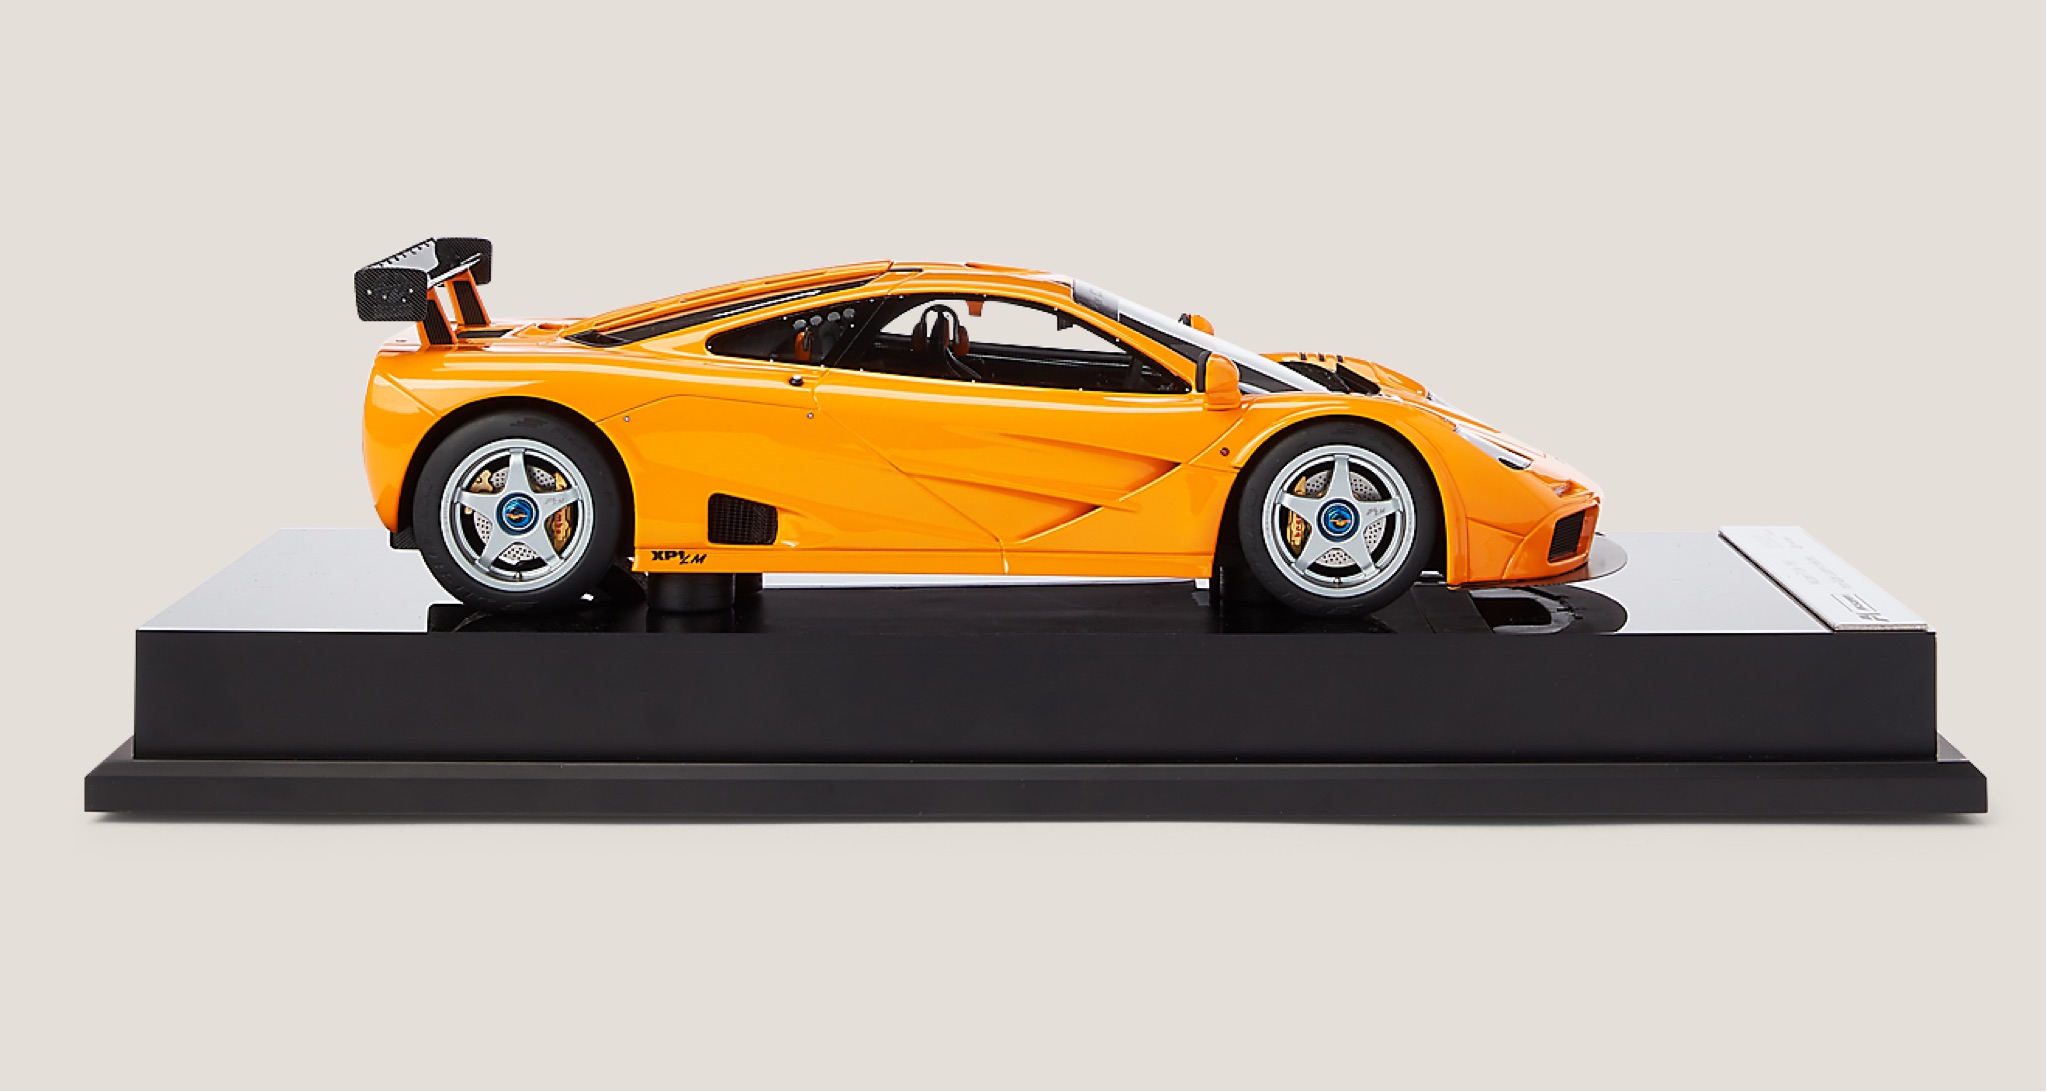 <span>Detailed photographs helped the Amalgam team to match the color and gloss of Mr. Lauren’s 1996 McLaren F1 “supercar,” the first all-carbon-composition car and one of the fastest production cars in the world</span><br/><a href="https://www.ralphlauren.com/home-decor-decorative-accessories/mclaren-f1-lm/588326.html?dwvar588326_colorname=Orange" target="_blank" class="rlc-linecta rlc-lineplay"><span>SHOP NOW</span></a>